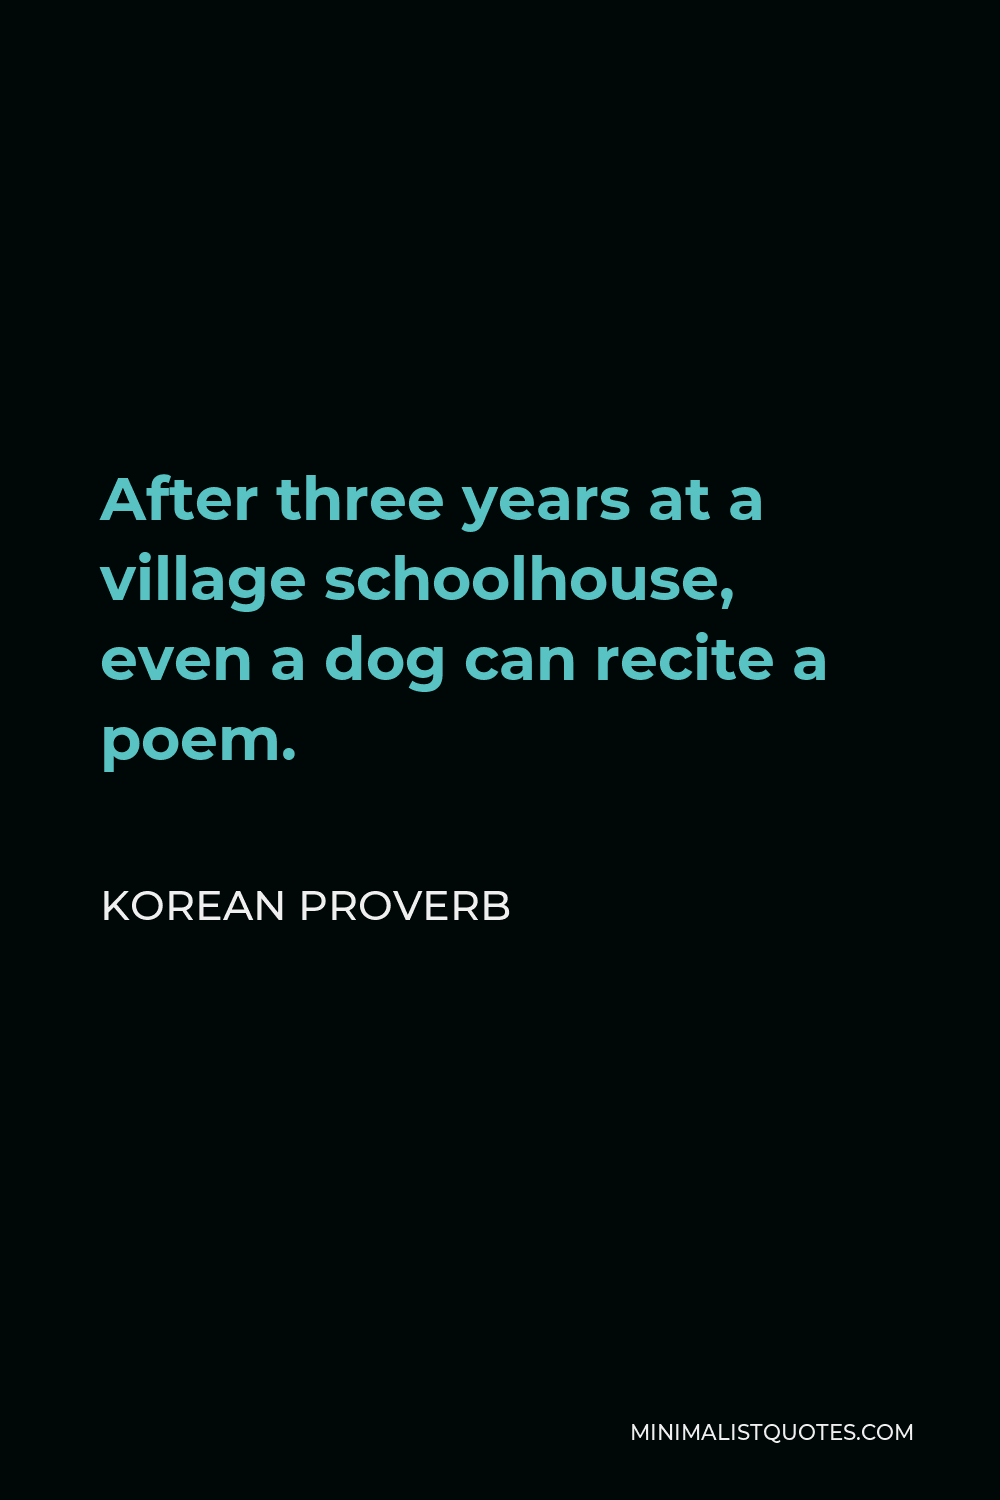 Korean Proverb Quote - After three years at a village schoolhouse, even a dog can recite a poem.